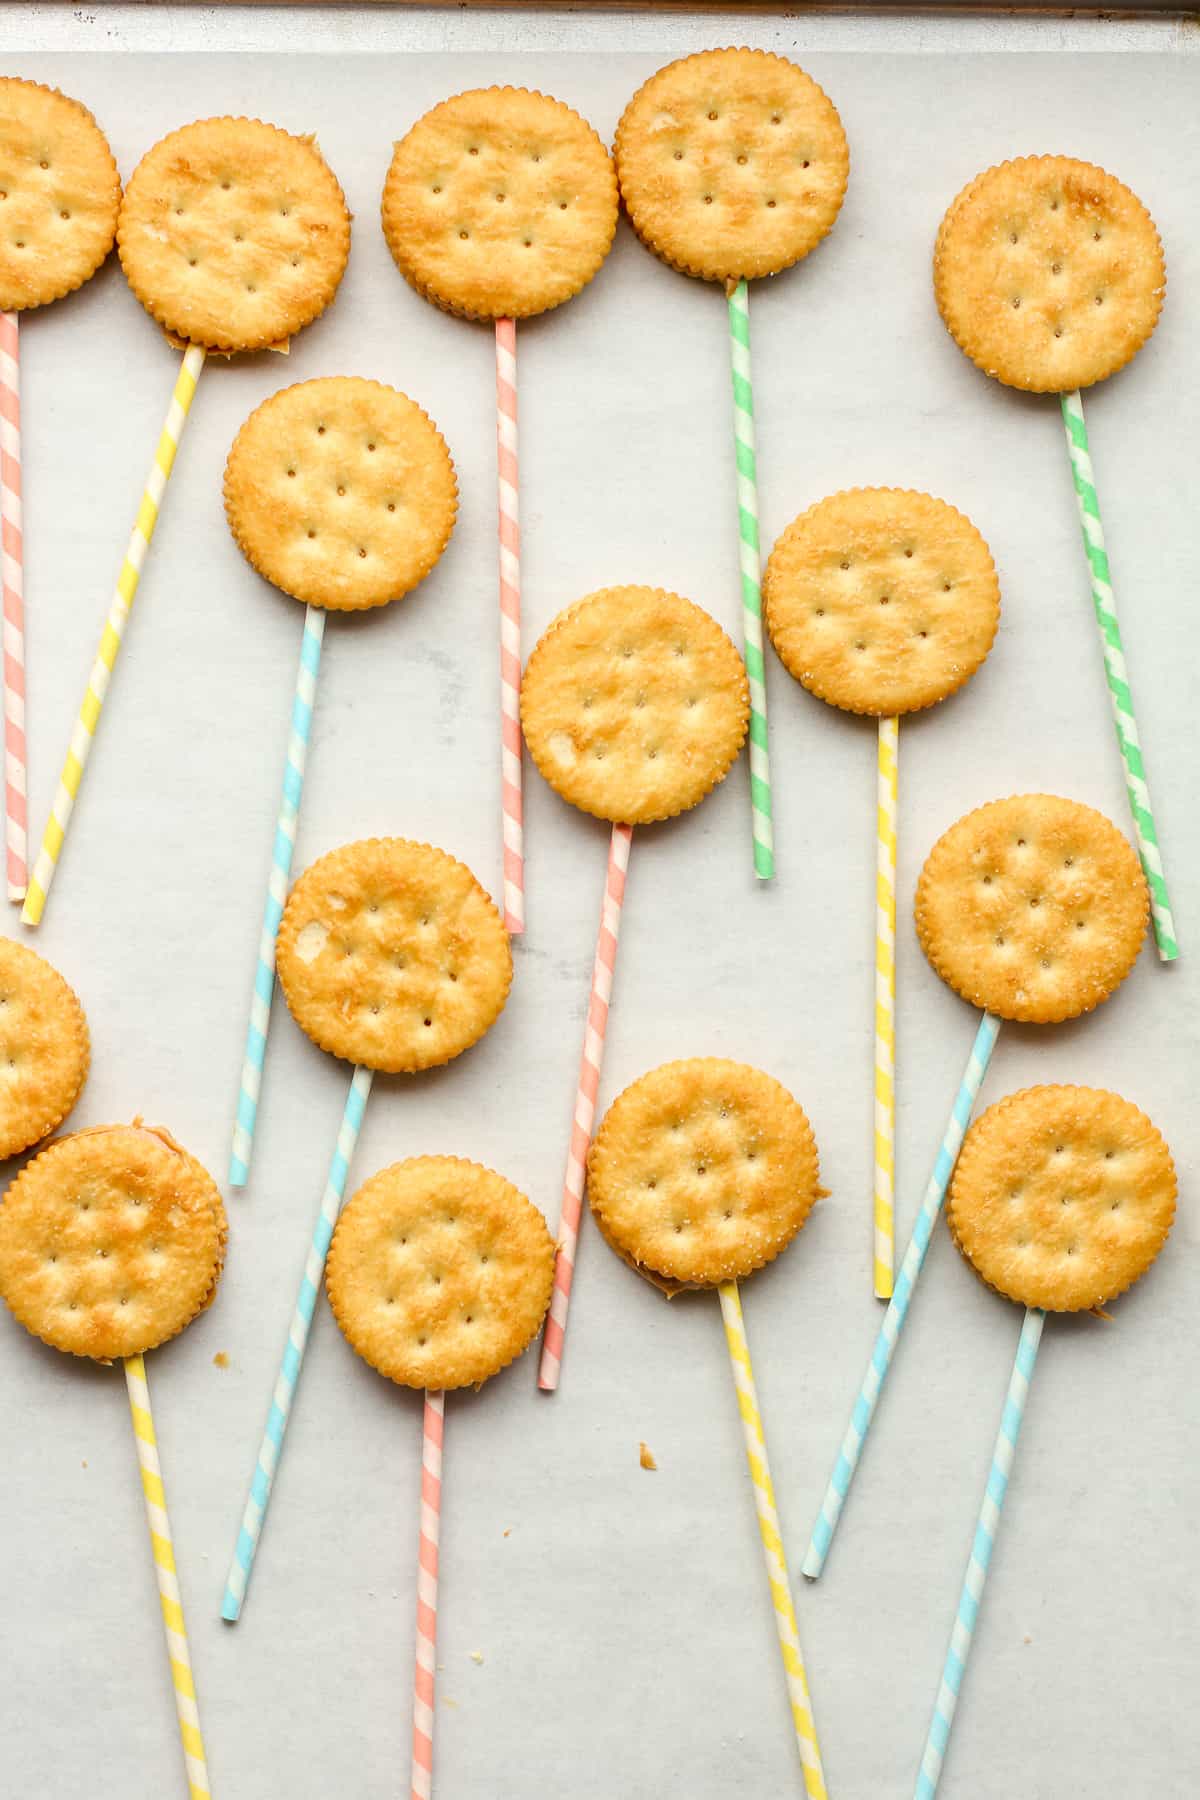 The peanut butter filled ritz crackers with lollipop sticks.